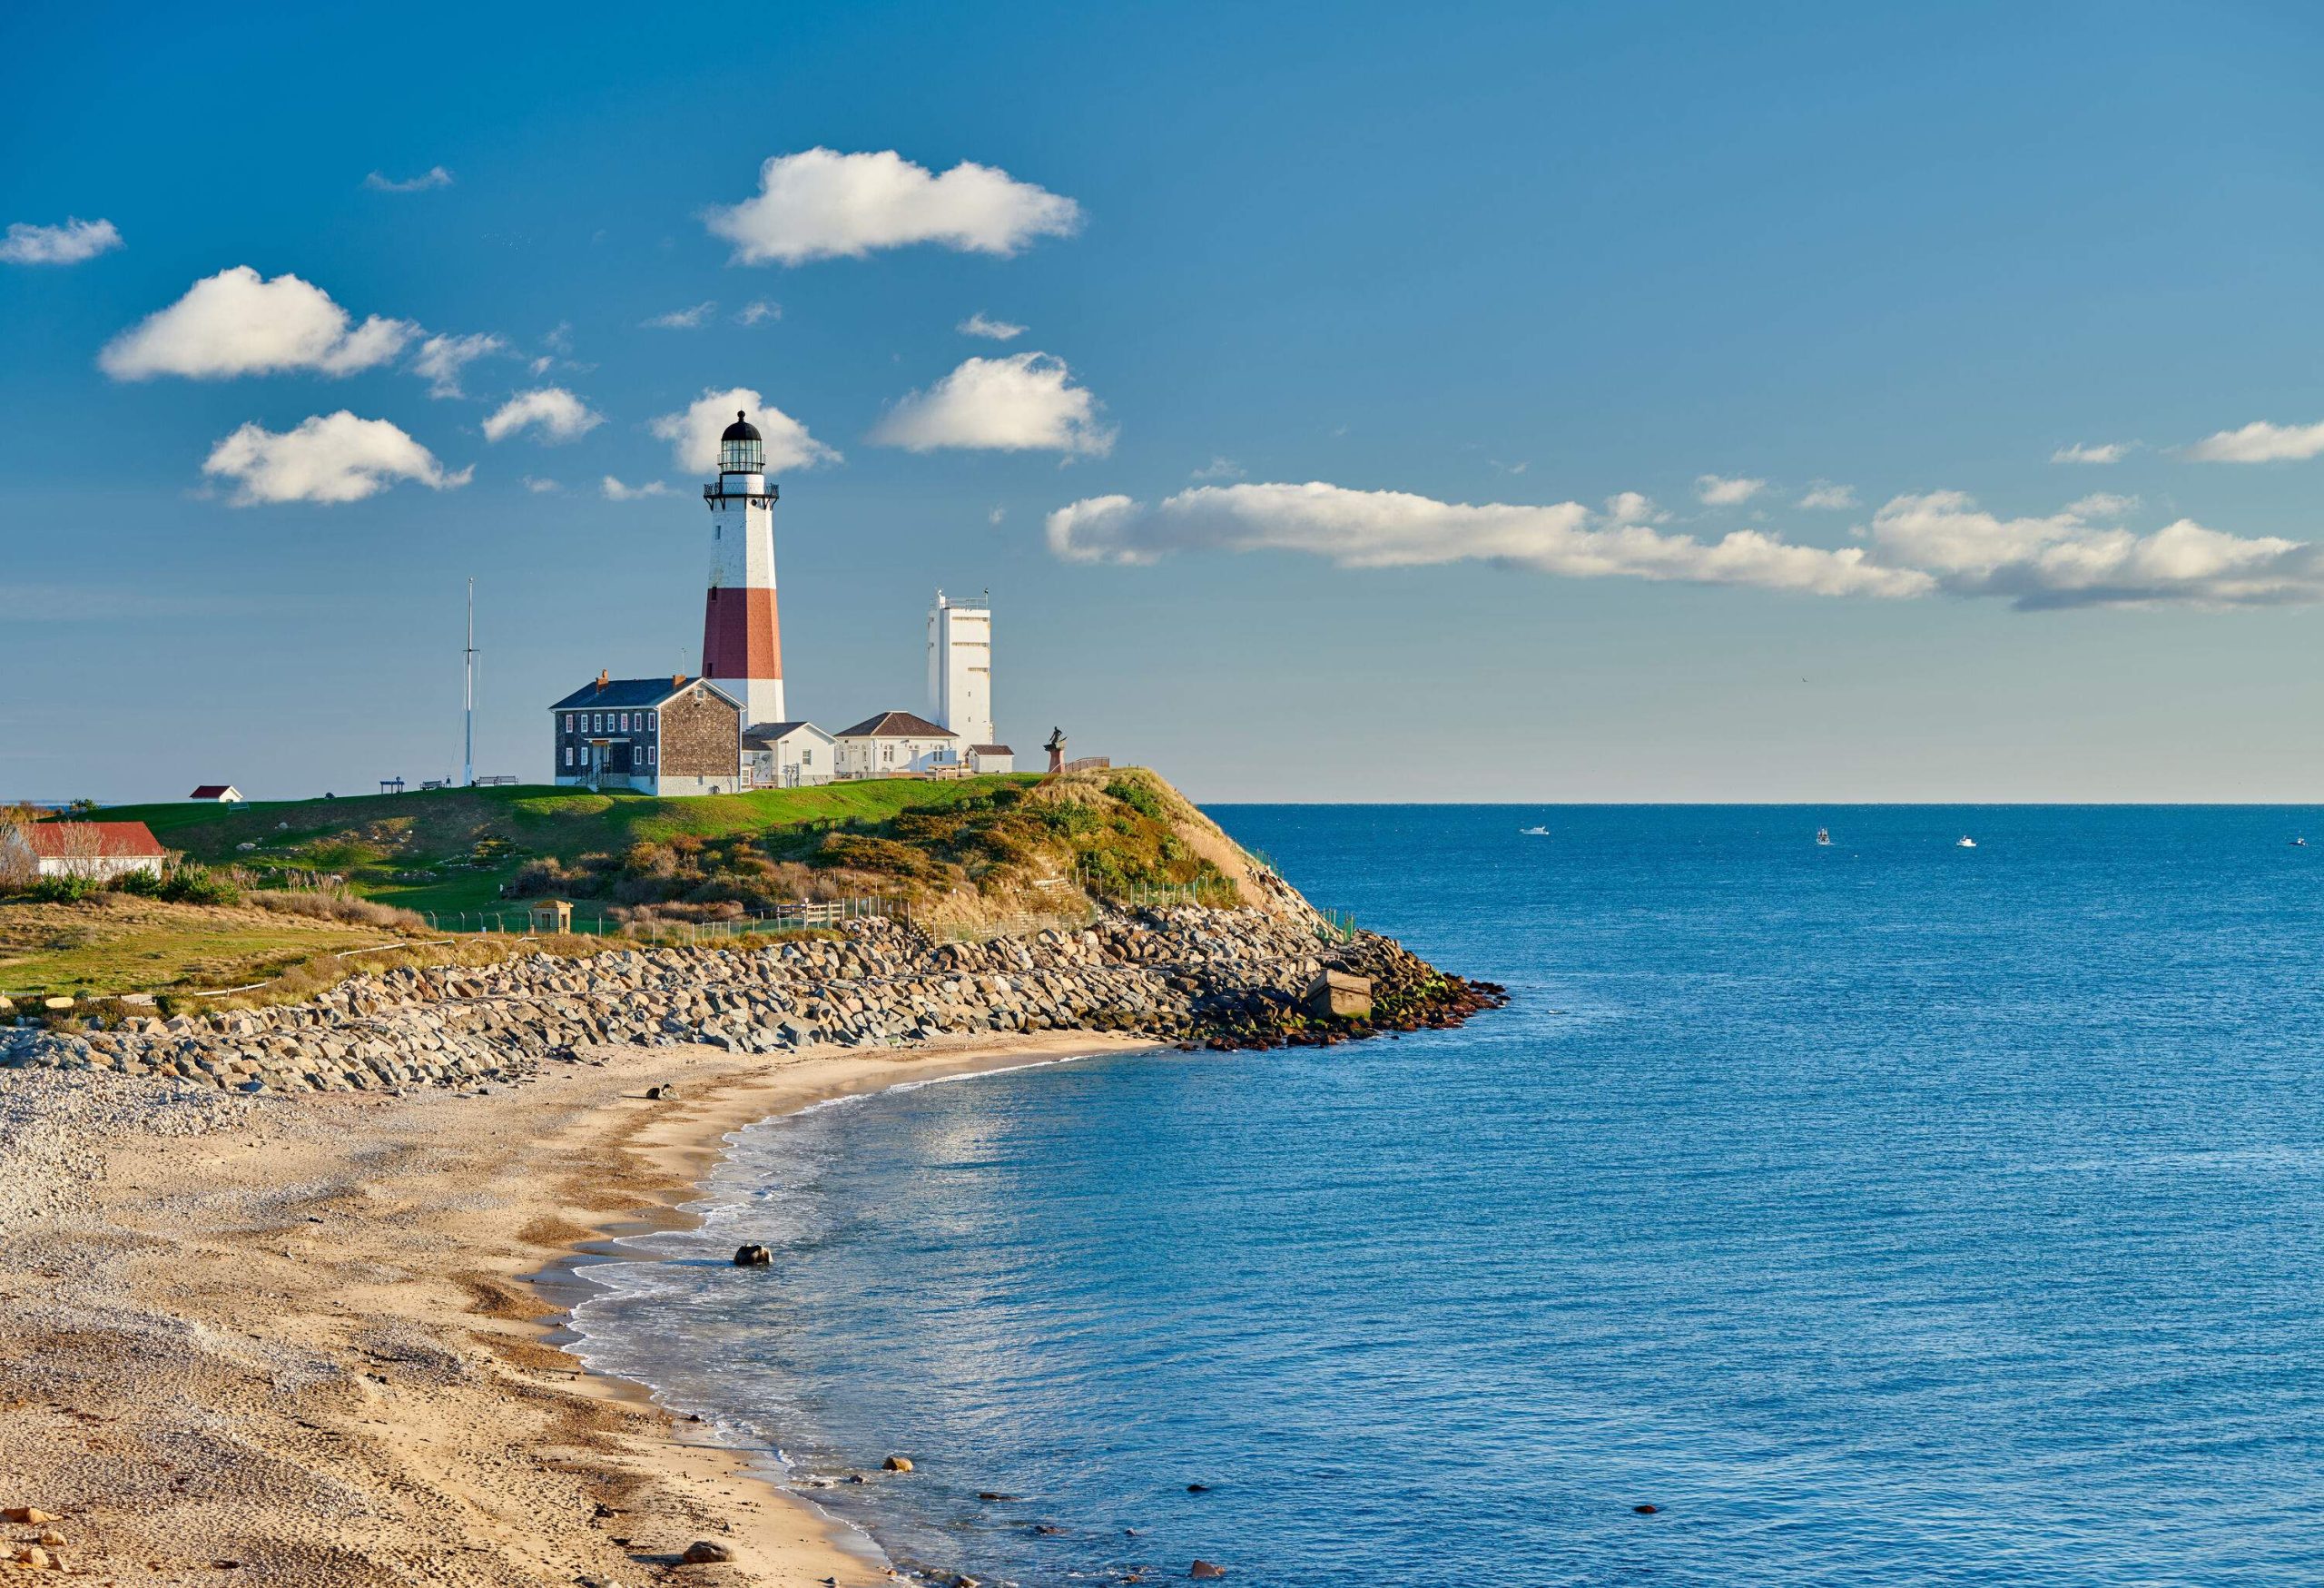 A red and white lighthouse on a coast's edge with vast ocean views.